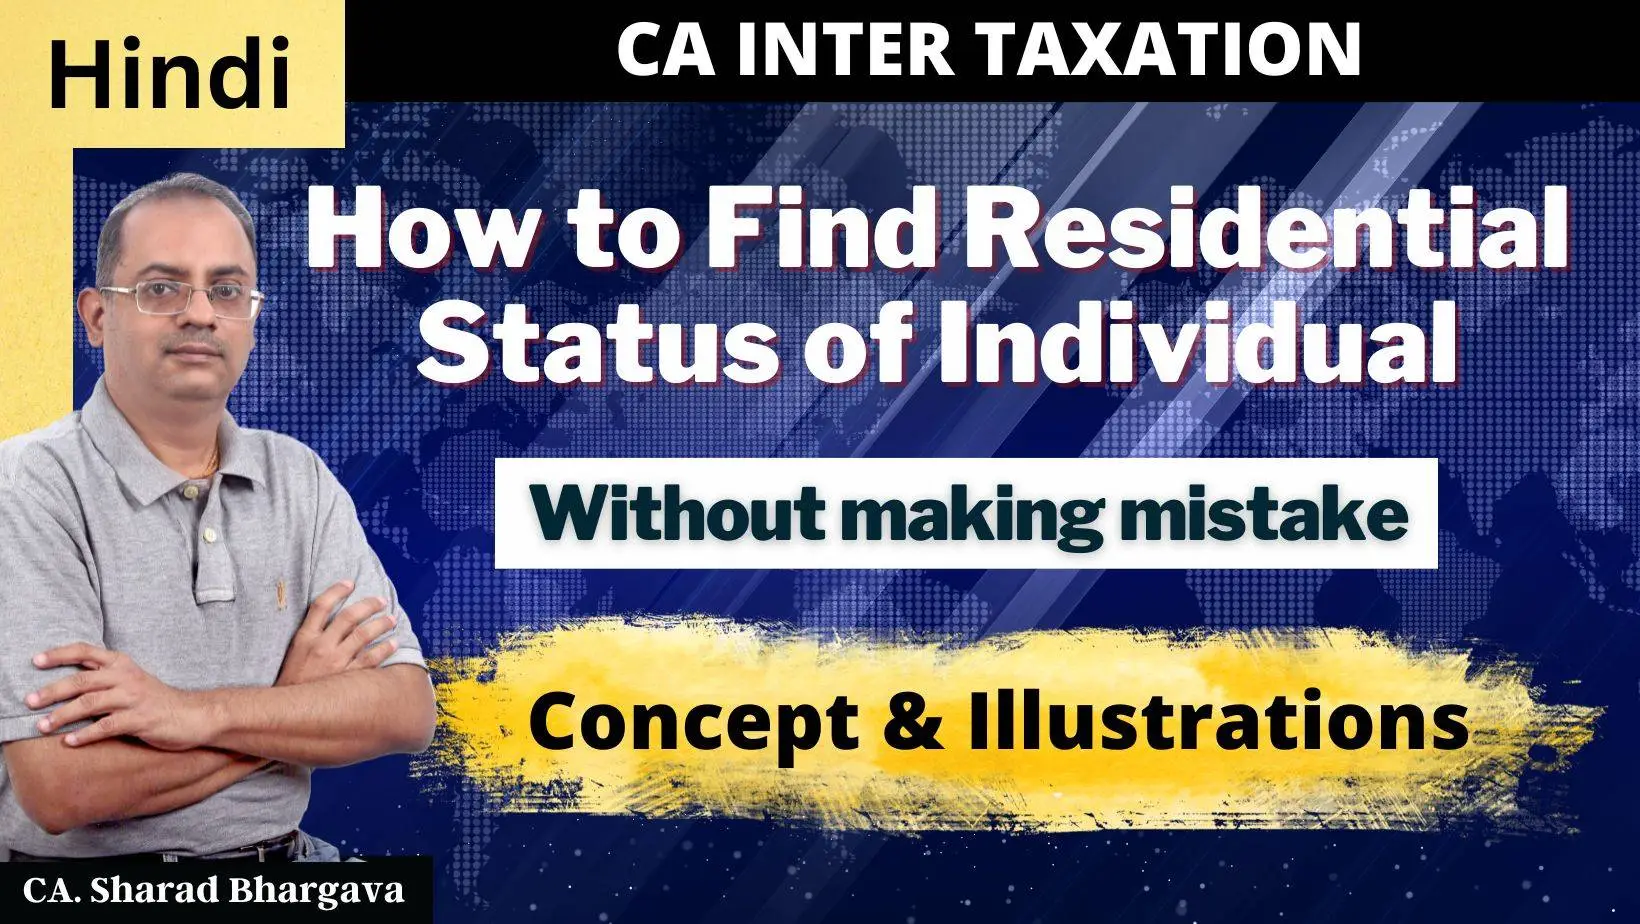 (Hindi) / How to find residential status of individual / Concept & Examples / CA. Sharad Bhargava